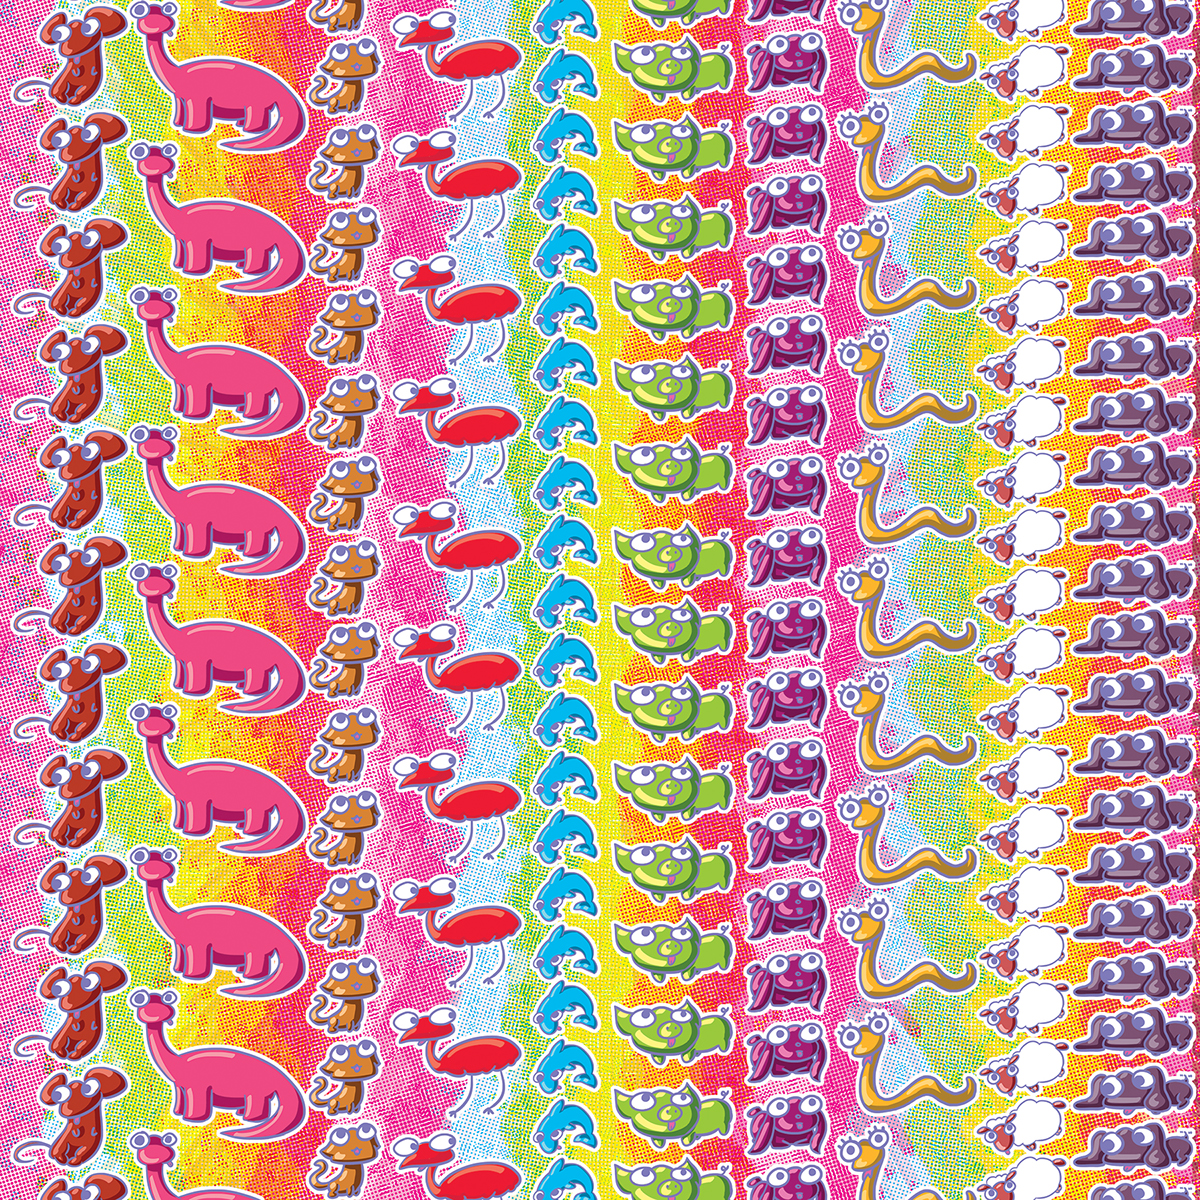 animals colors colorful scarf pattern spectrum rainbow silly cute repeat surface design